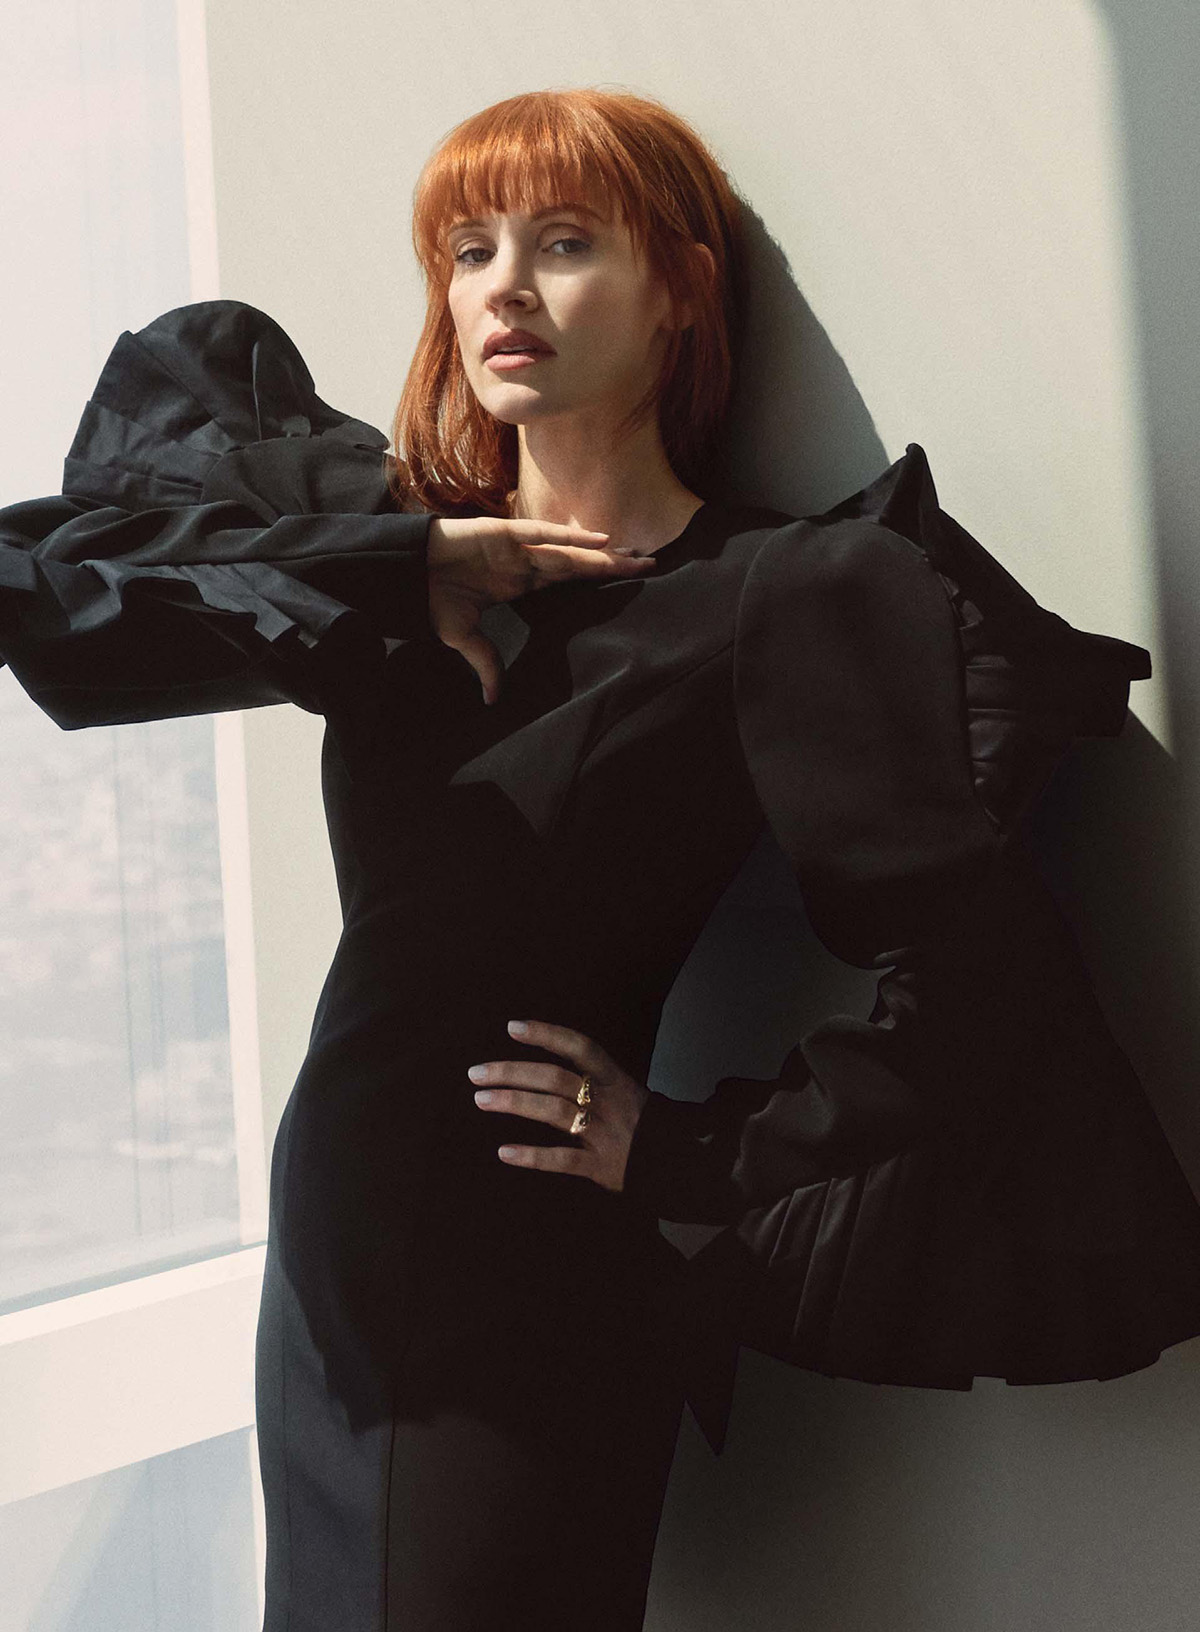 Jessica Chastain covers The Sunday Times Style January 9th, 2022 by Sebastian Kim